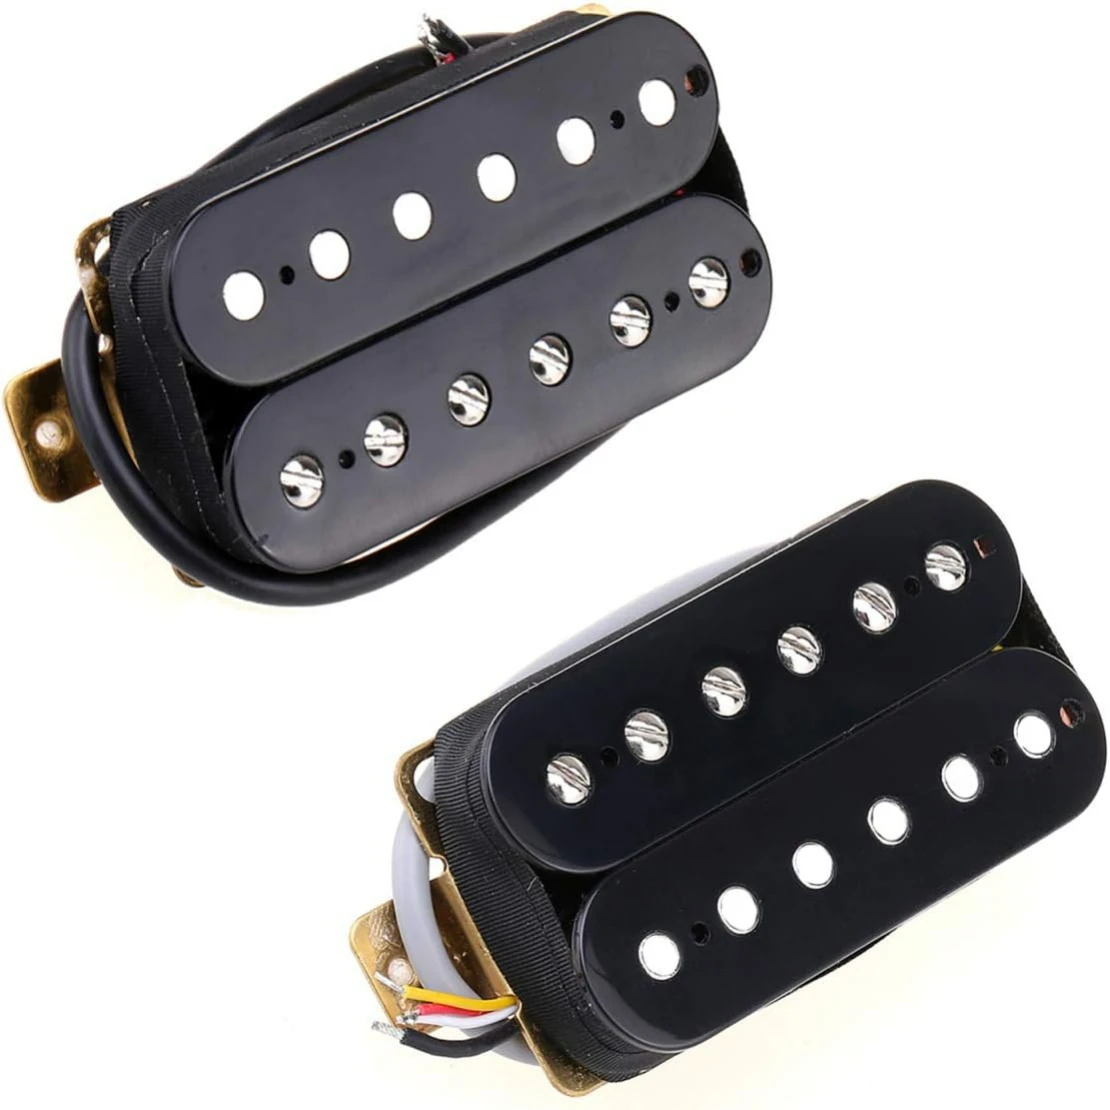 

Alnico 5 Humbucker Pickup Double Coil Electric Guitar Pickups Set with Neck and Bridge with Prewired and Screws Parts Kit Black